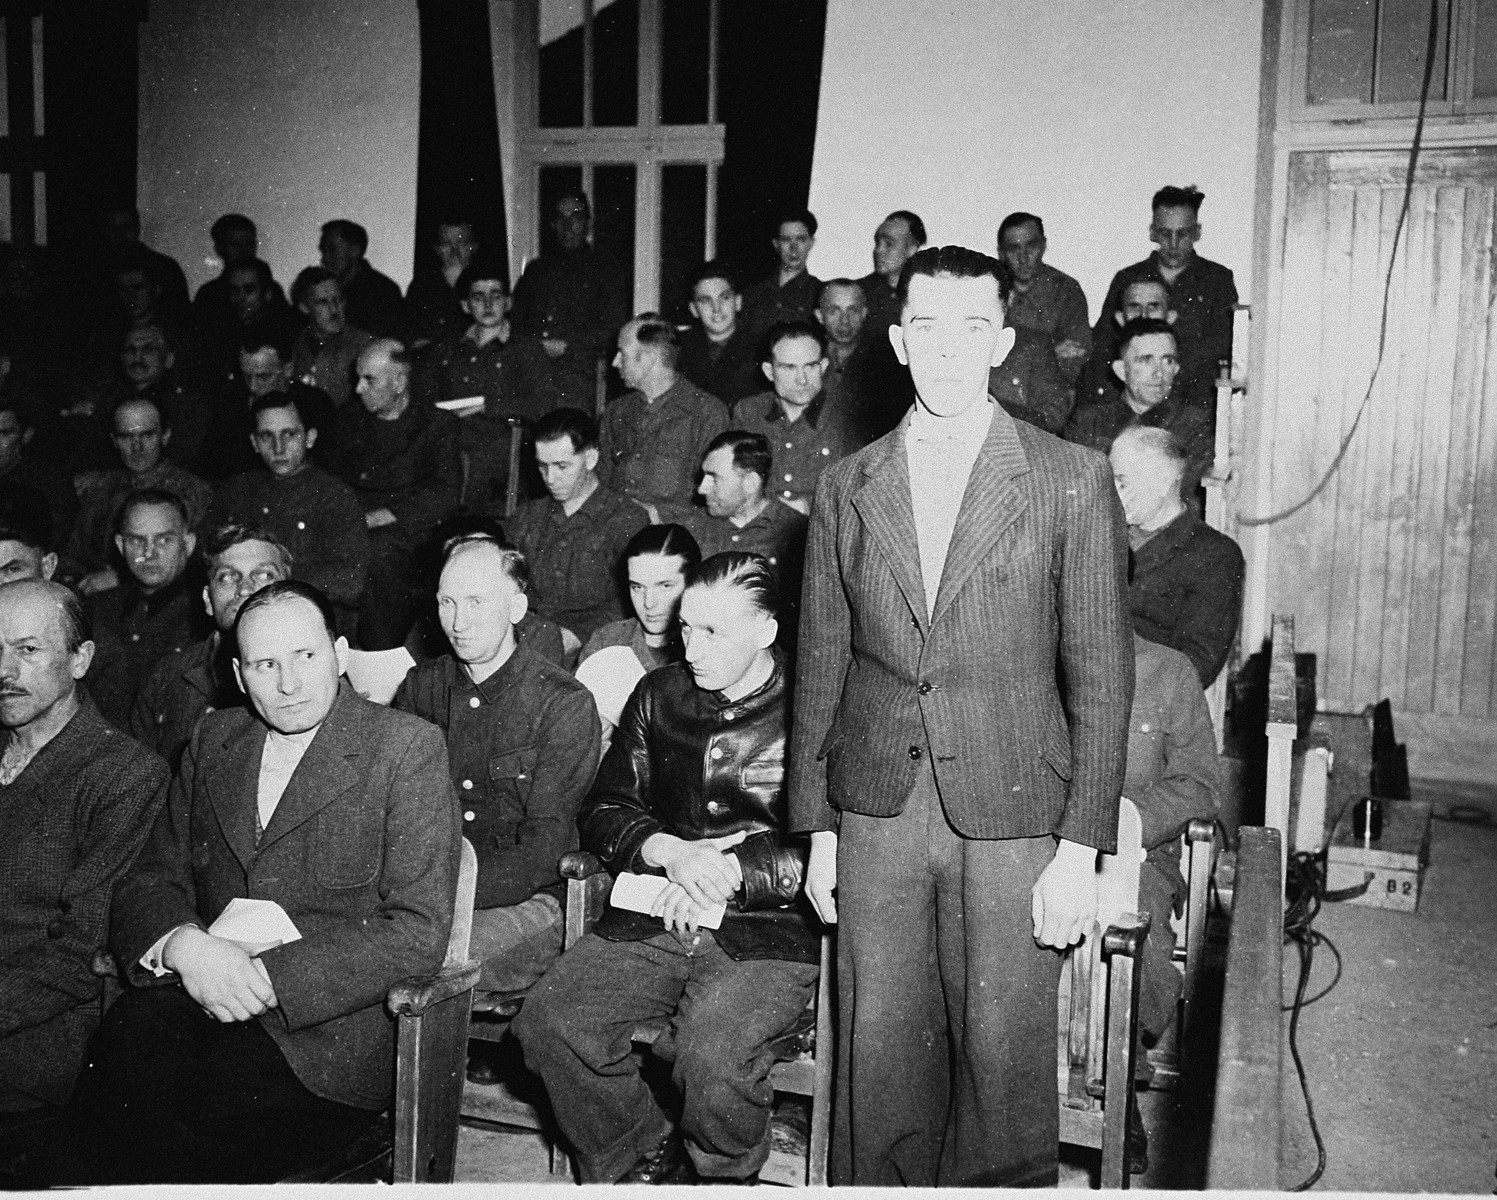 Former SS-Unterscharfuehrer Andreas Trumm, a defendant at the trial of 61 former camp personnel and prisoners from Mauthausen, stands in his place in the defendants' dock.  

Trumm was convicted and sentenced to death on May 13, 1946.